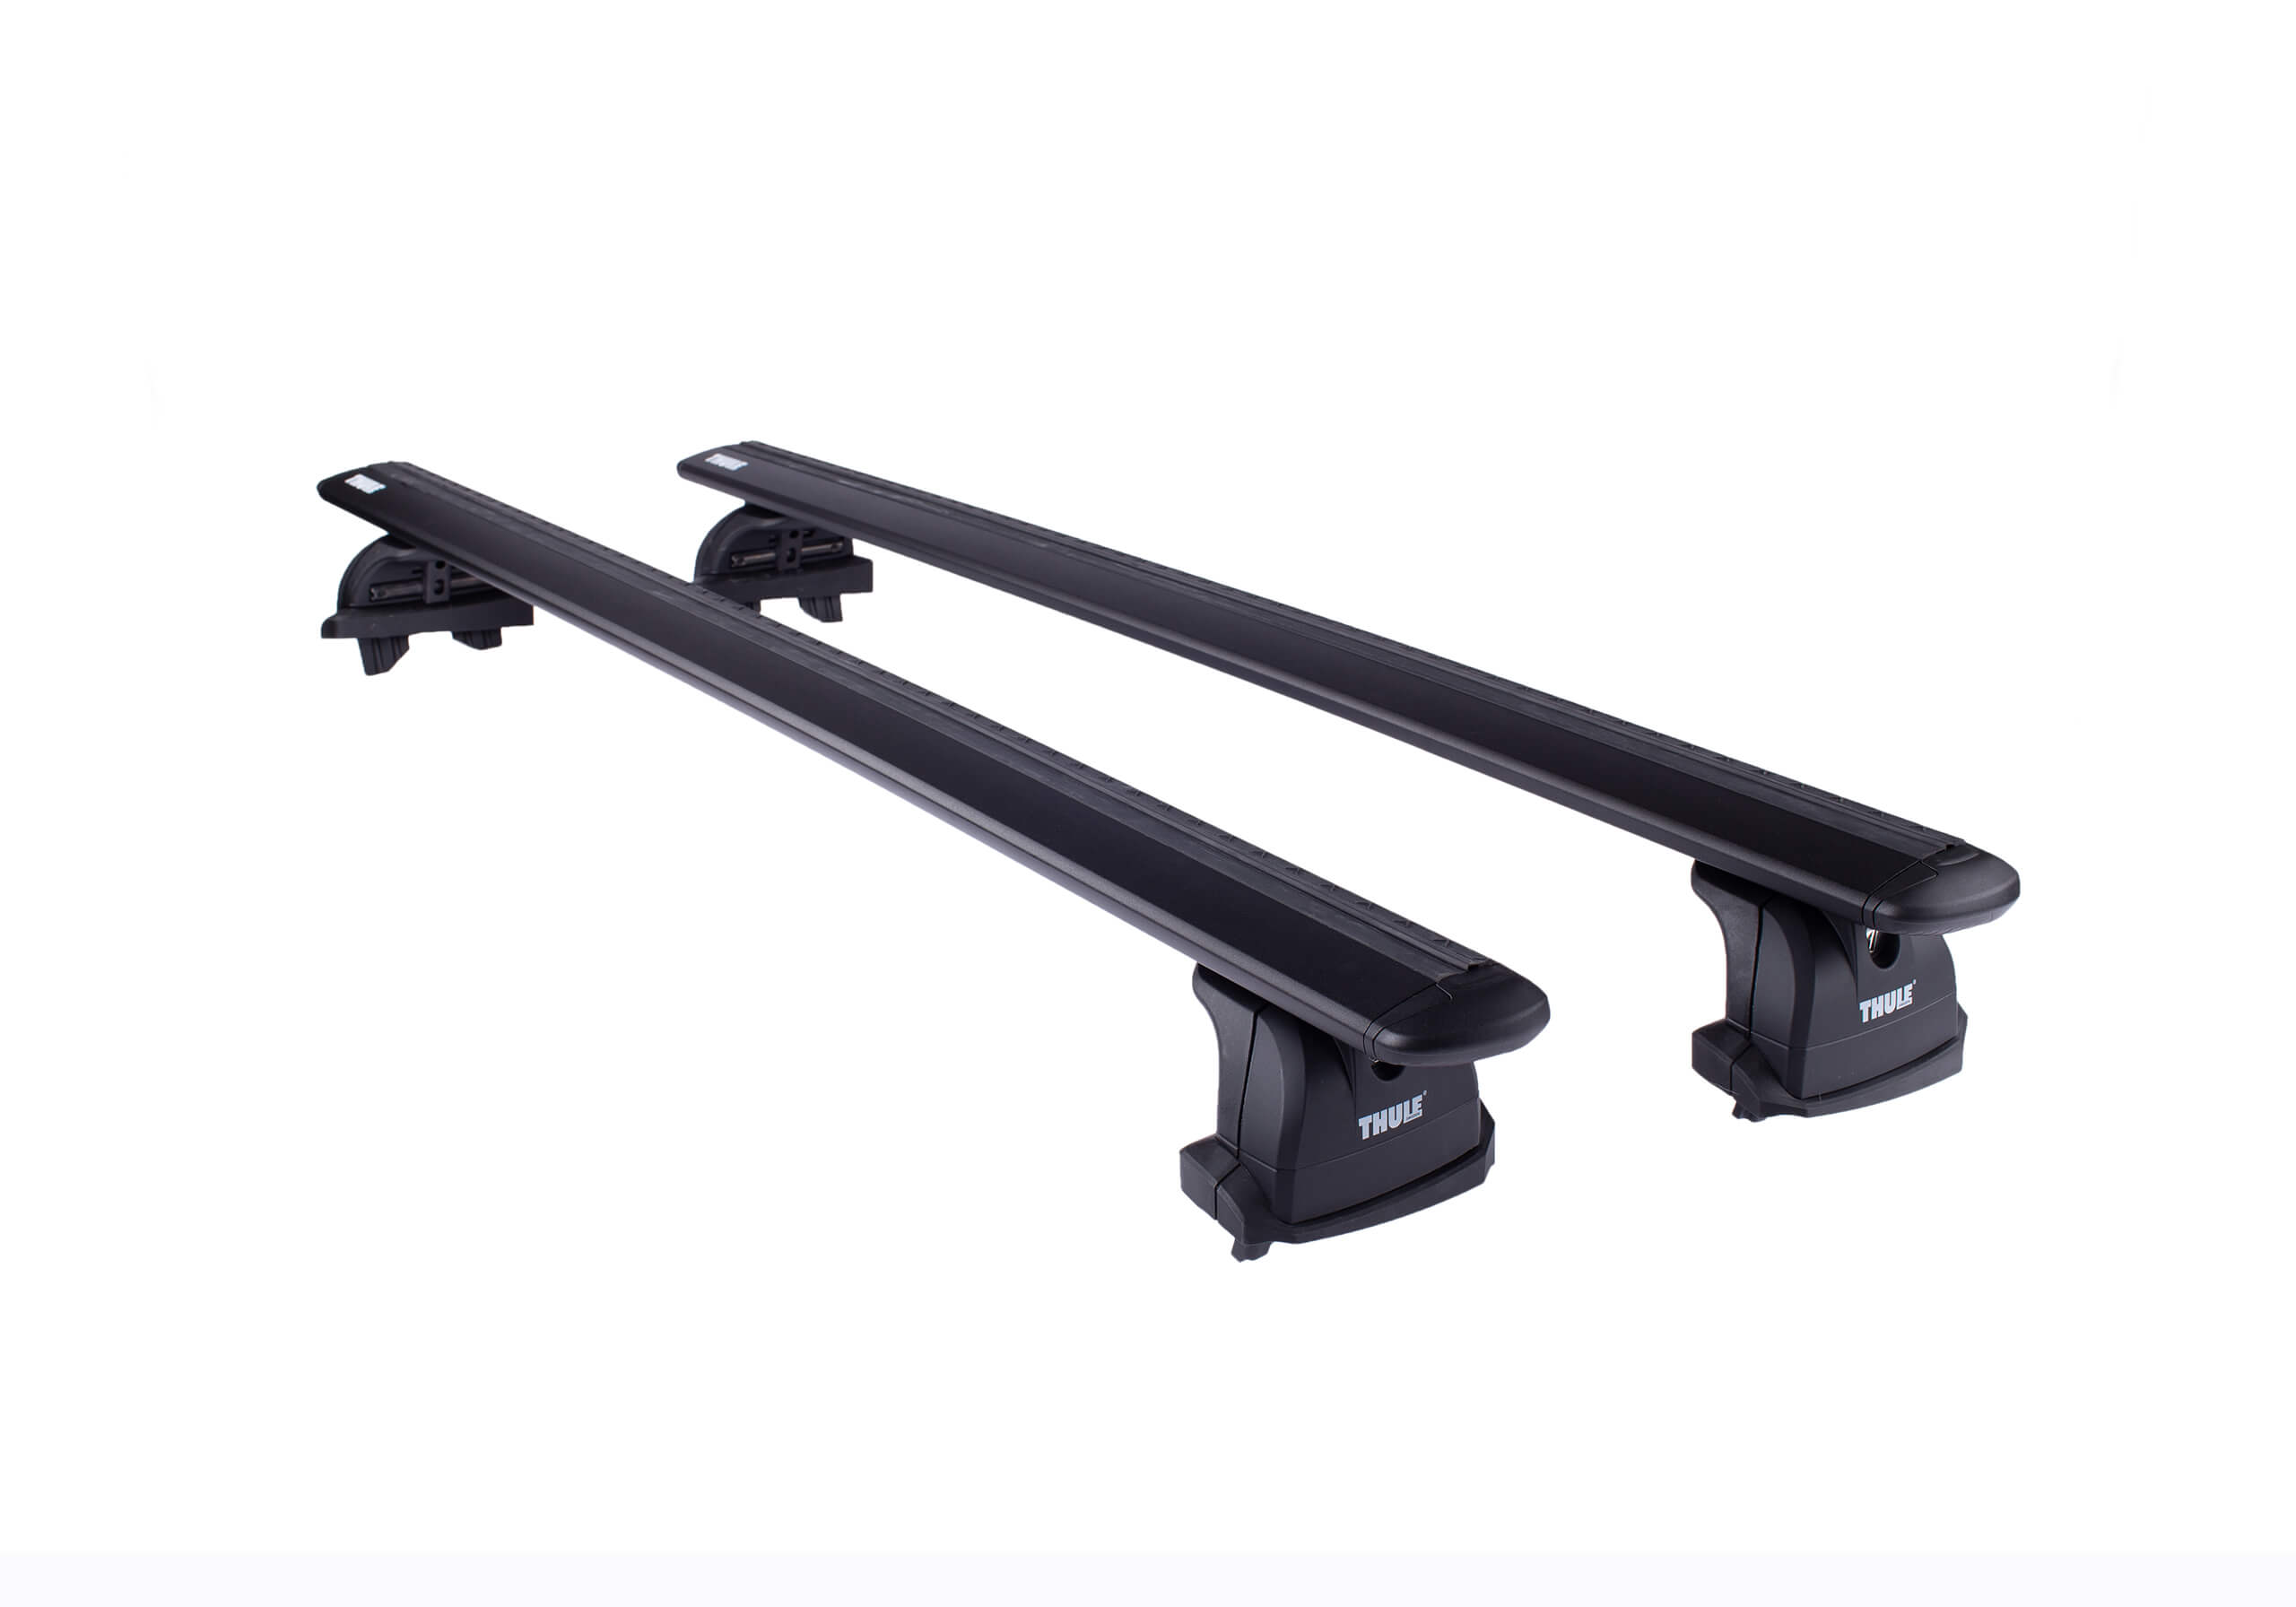 BMW 1 series coupe (2007 to 2015):Thule black WingBars package - 753, 7112B, 3039